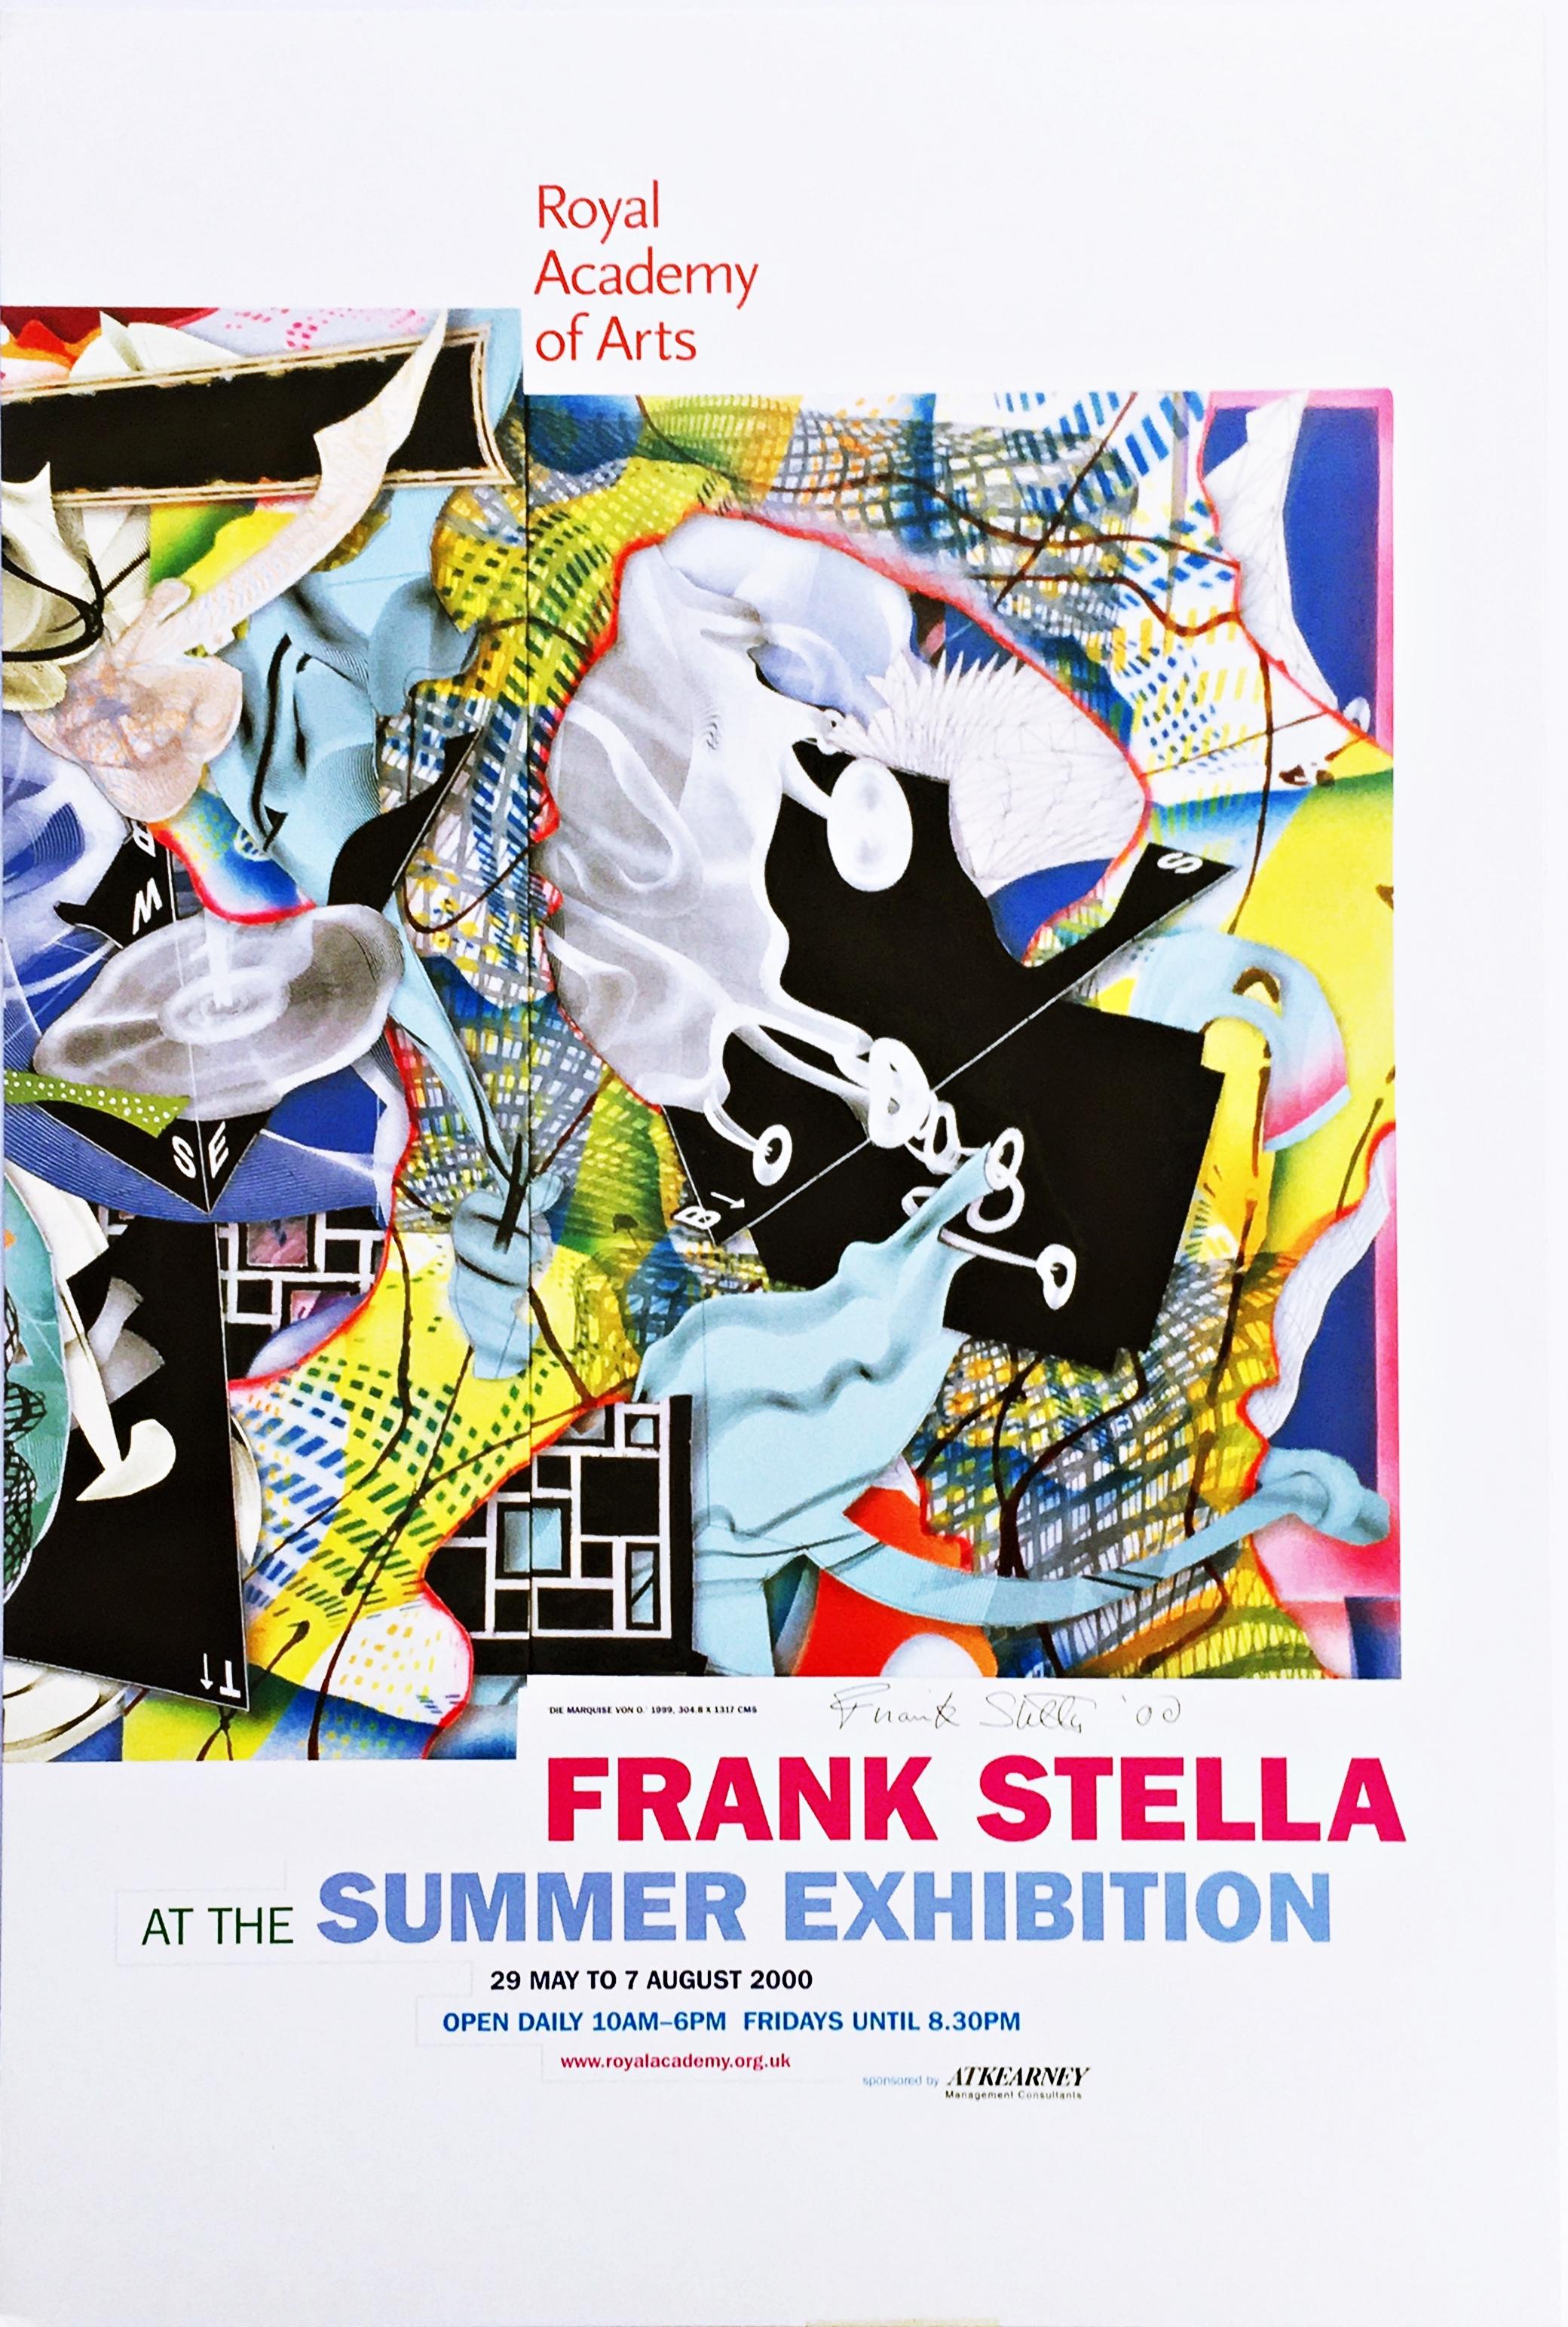 Frank Stella
Frank Stella, Royal Academy of Arts (Hand Signed), 2000
Offset Lithograph on board 
Boldly hand signed and dated by Frank Stella in ink on the front
29 3/4 x 20 inches
Unframed
This Frank Stella poster was published on the occasion of